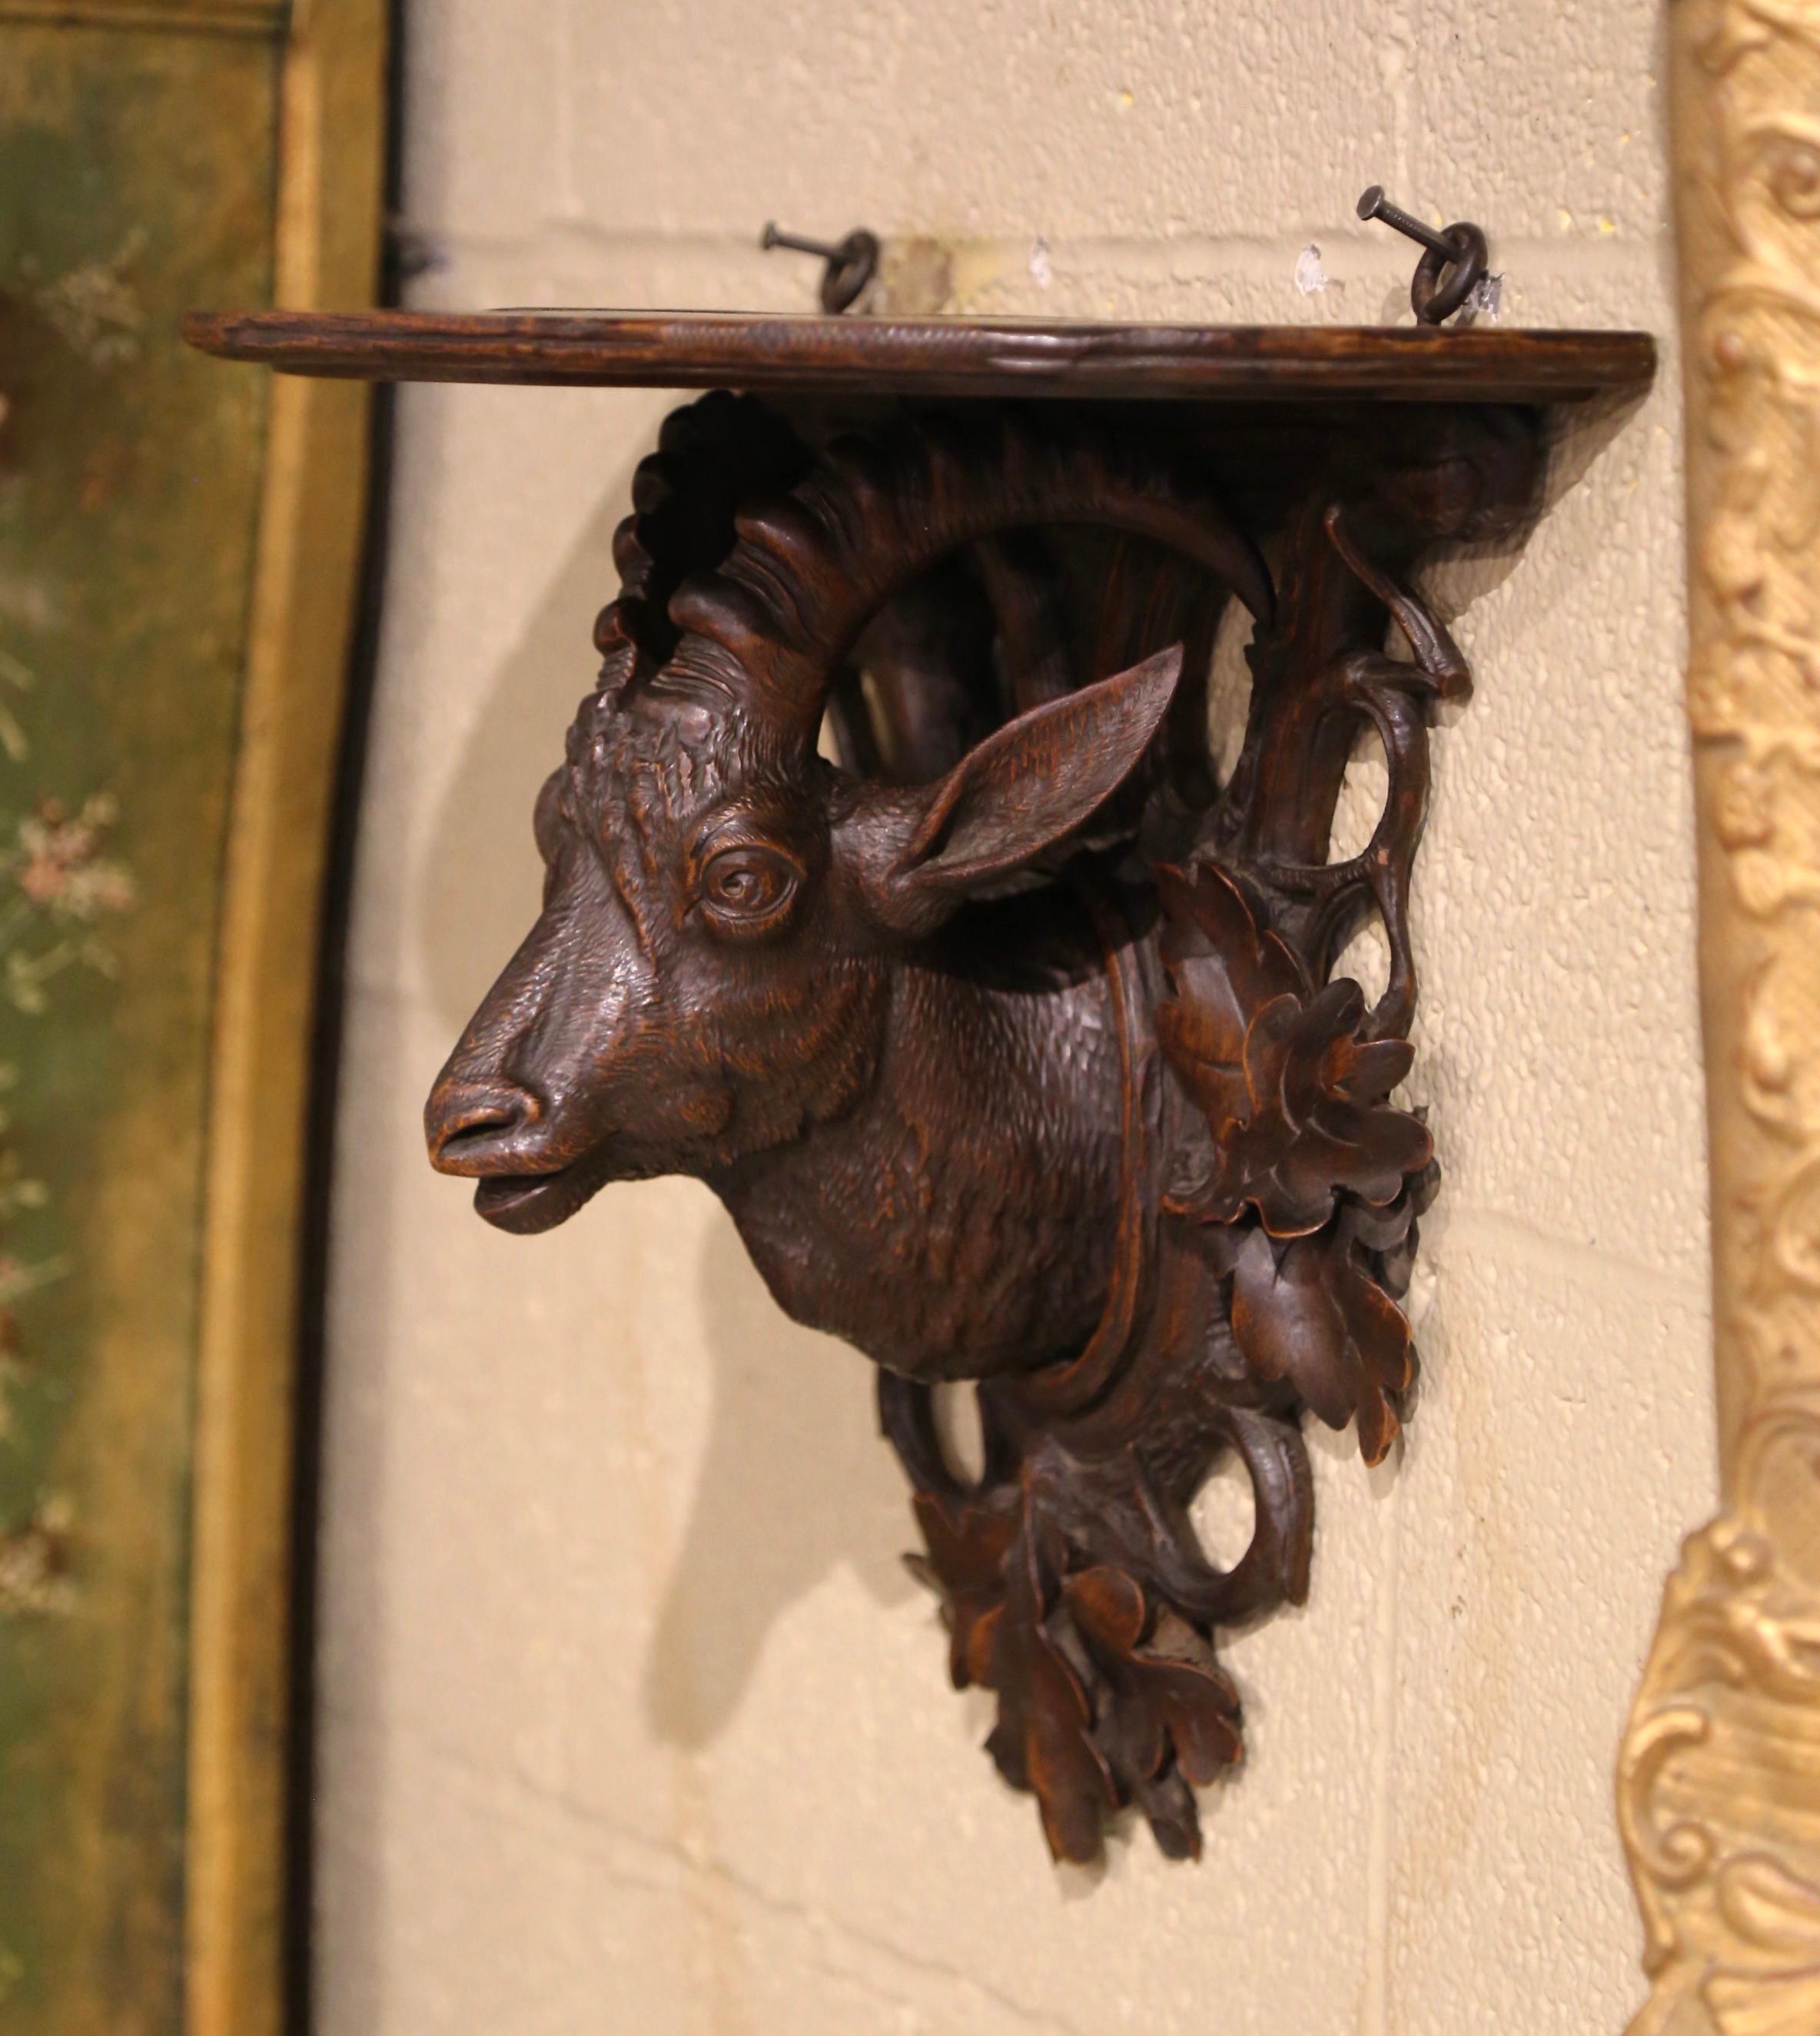 This beautifully antique wall bracket was carved in the Alps Mountains of France, circa 1870. Half circle in shape, the fruitwood shelf console features fine hand carved nature motifs including a deer figure, foliage and tree branches. The corbel